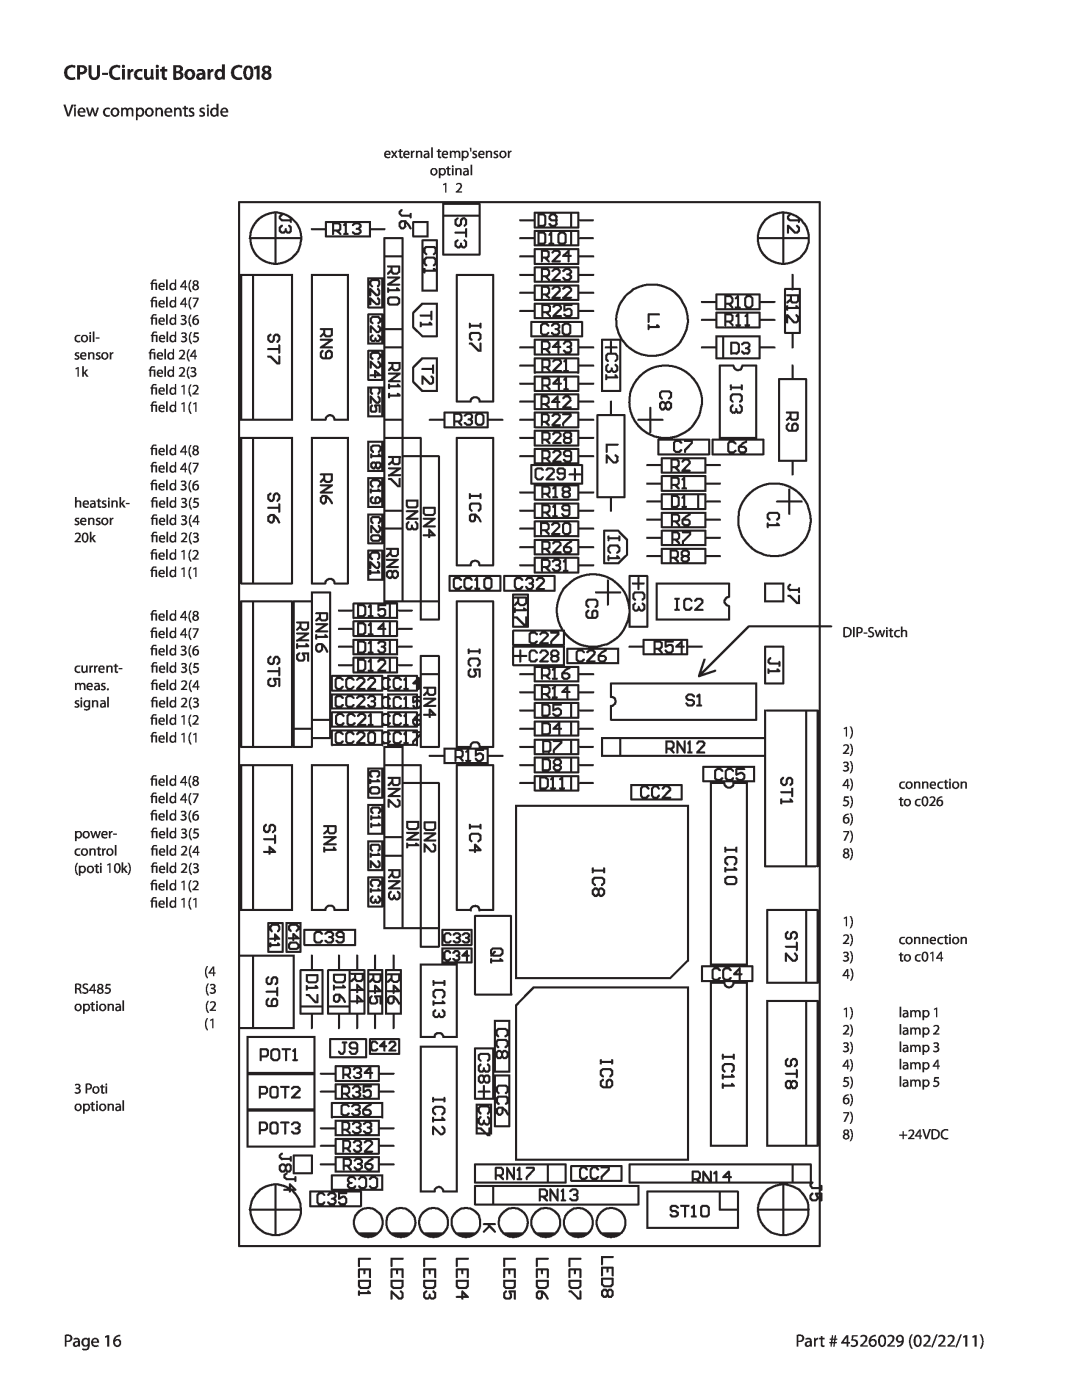 Garland 7000 service manual CPU-CircuitBoard C018, View components side, Page, 4526029 02/22/11 